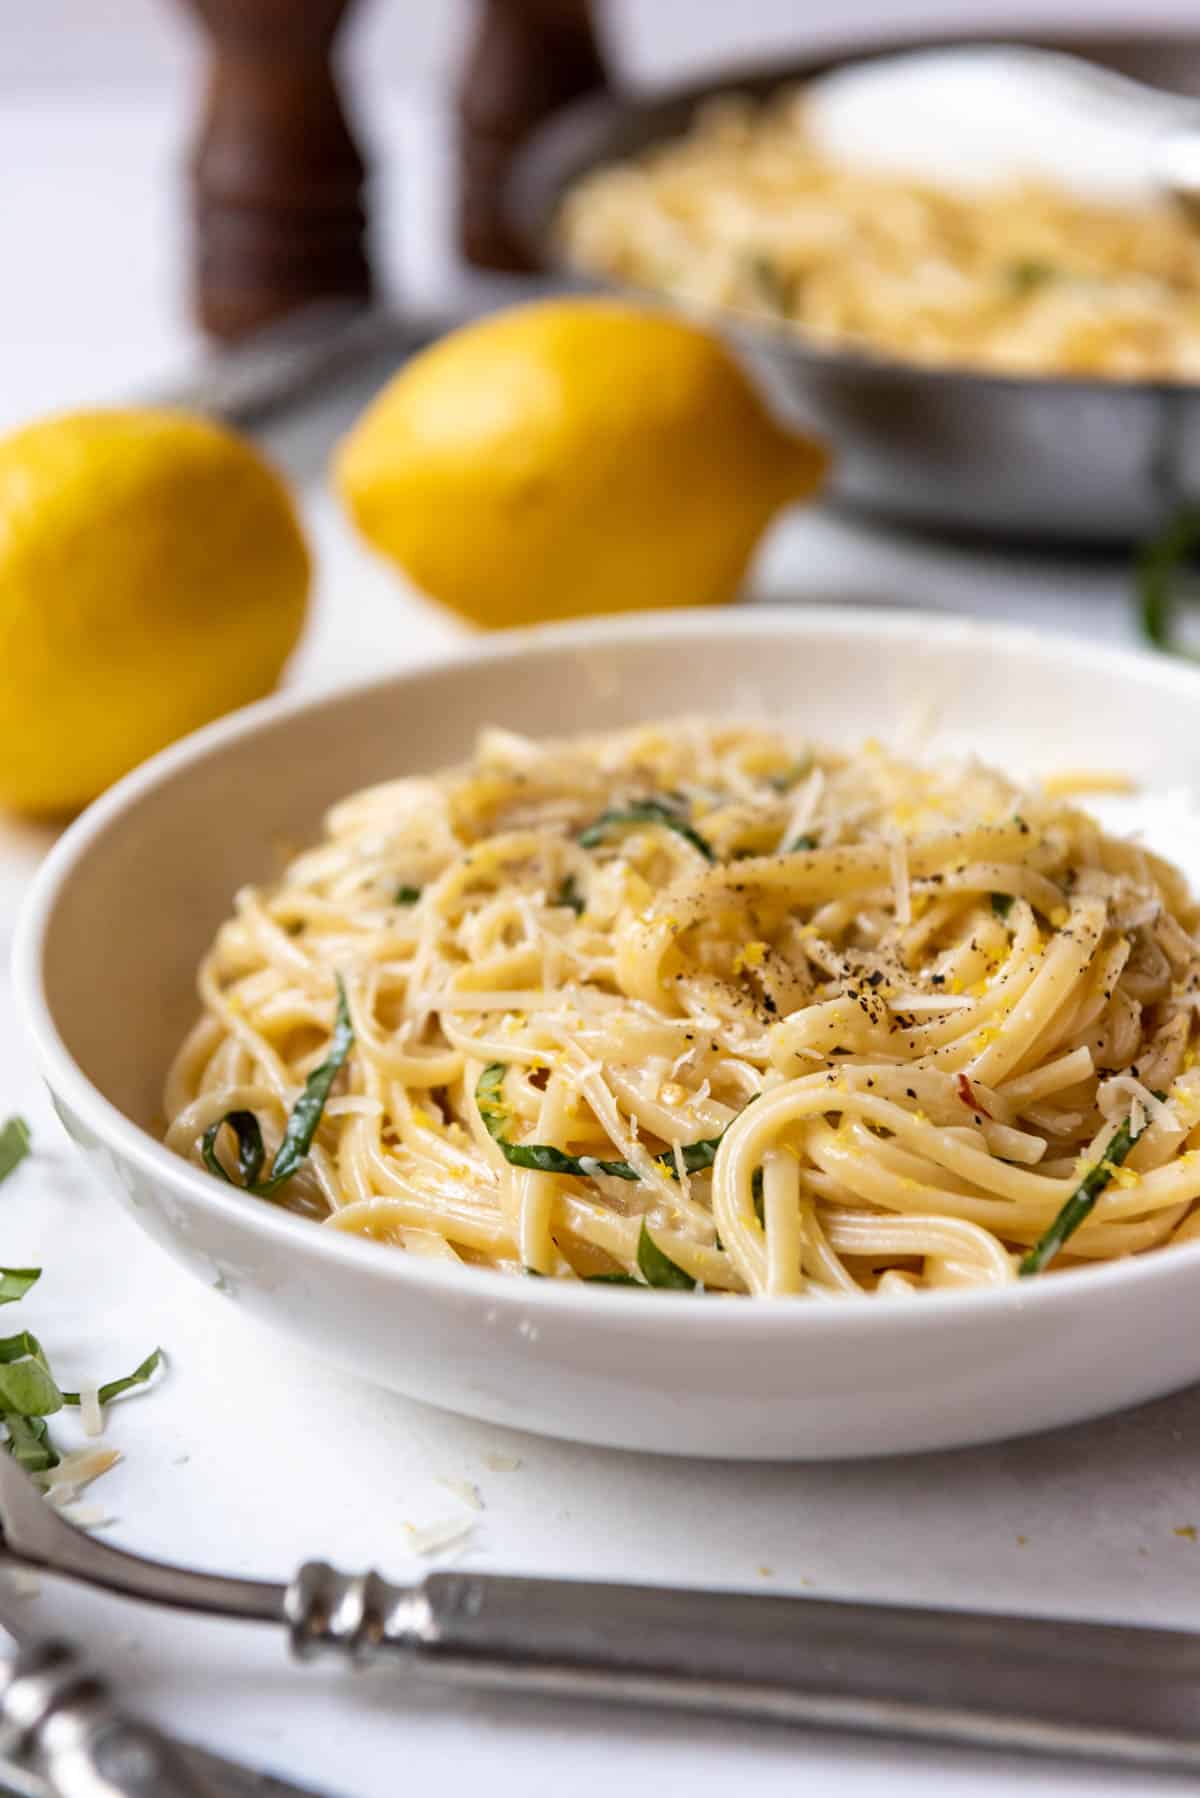 A bowl of creamy lemon pasta in front of whole lemons.